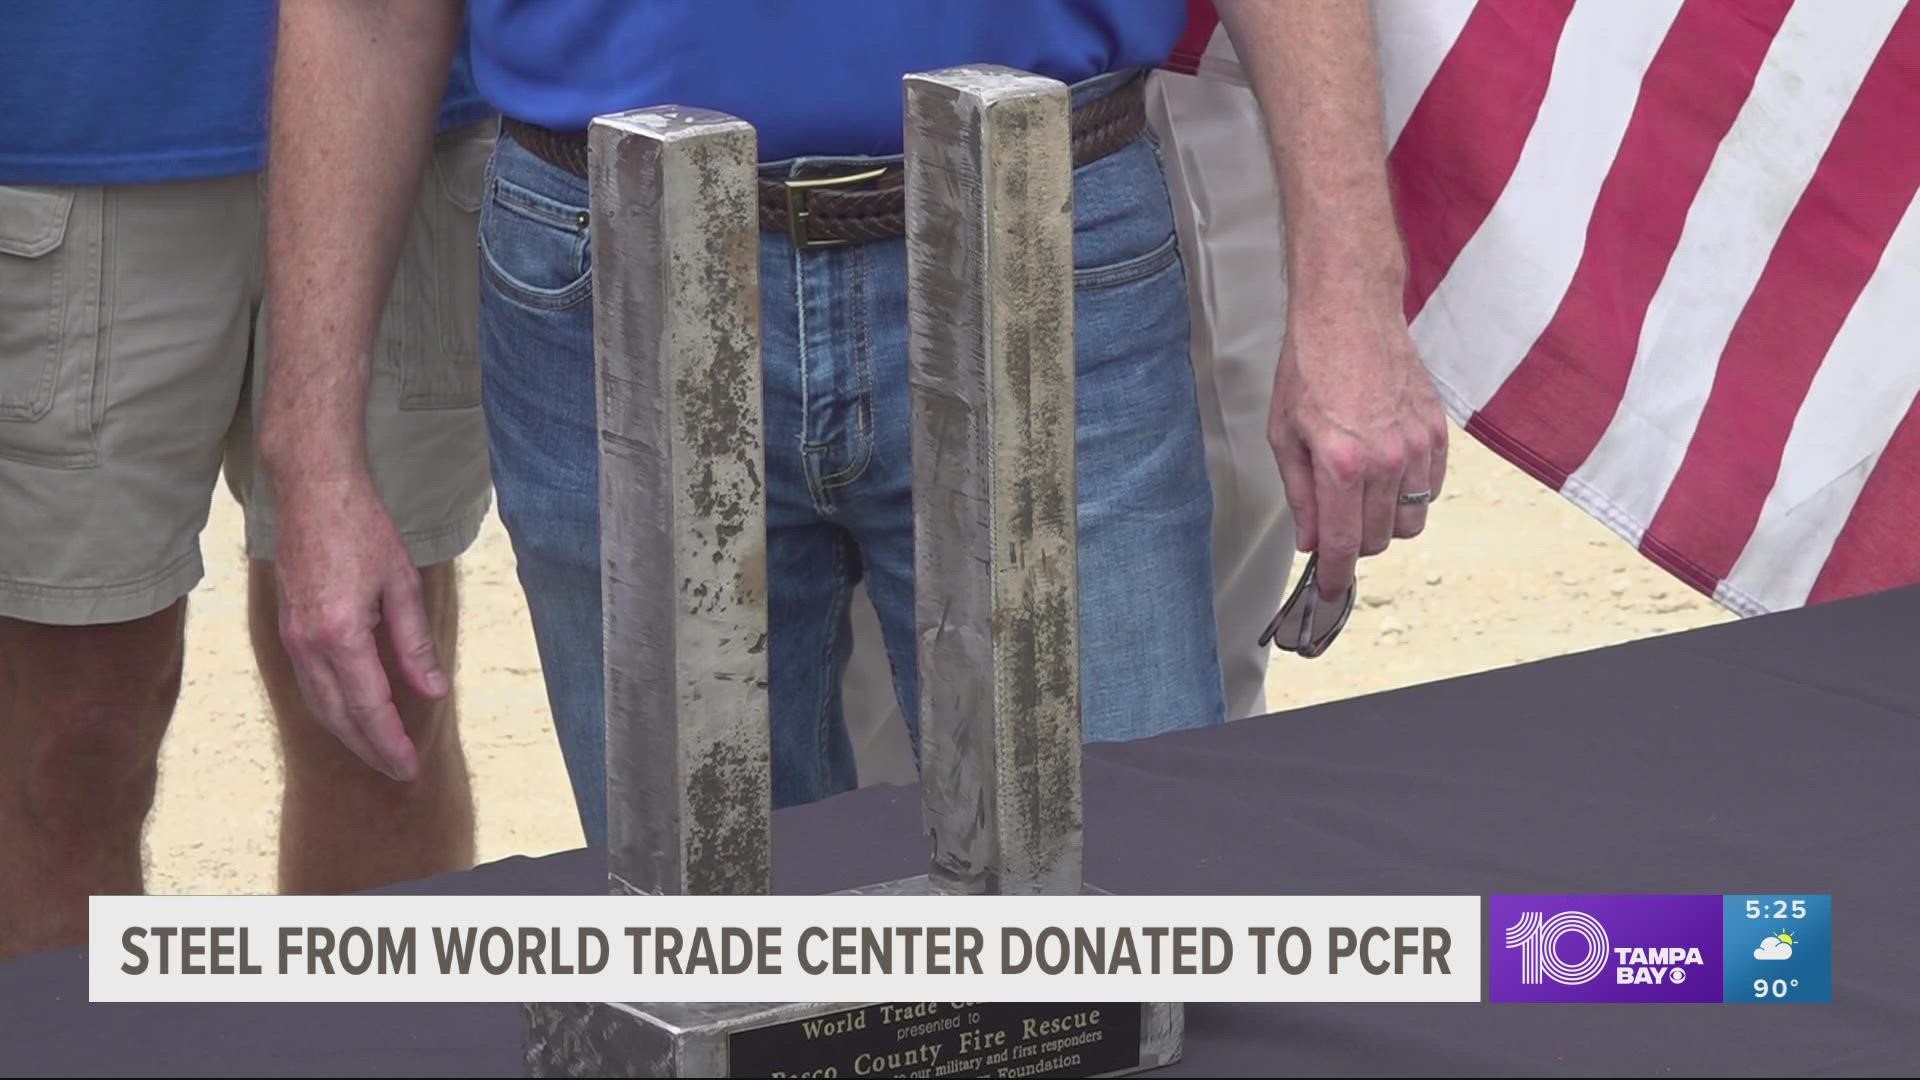 The Tunnel to Towers Foundation donated steel from the north tower of the World Trade Center to Pasco County Fire Rescue.